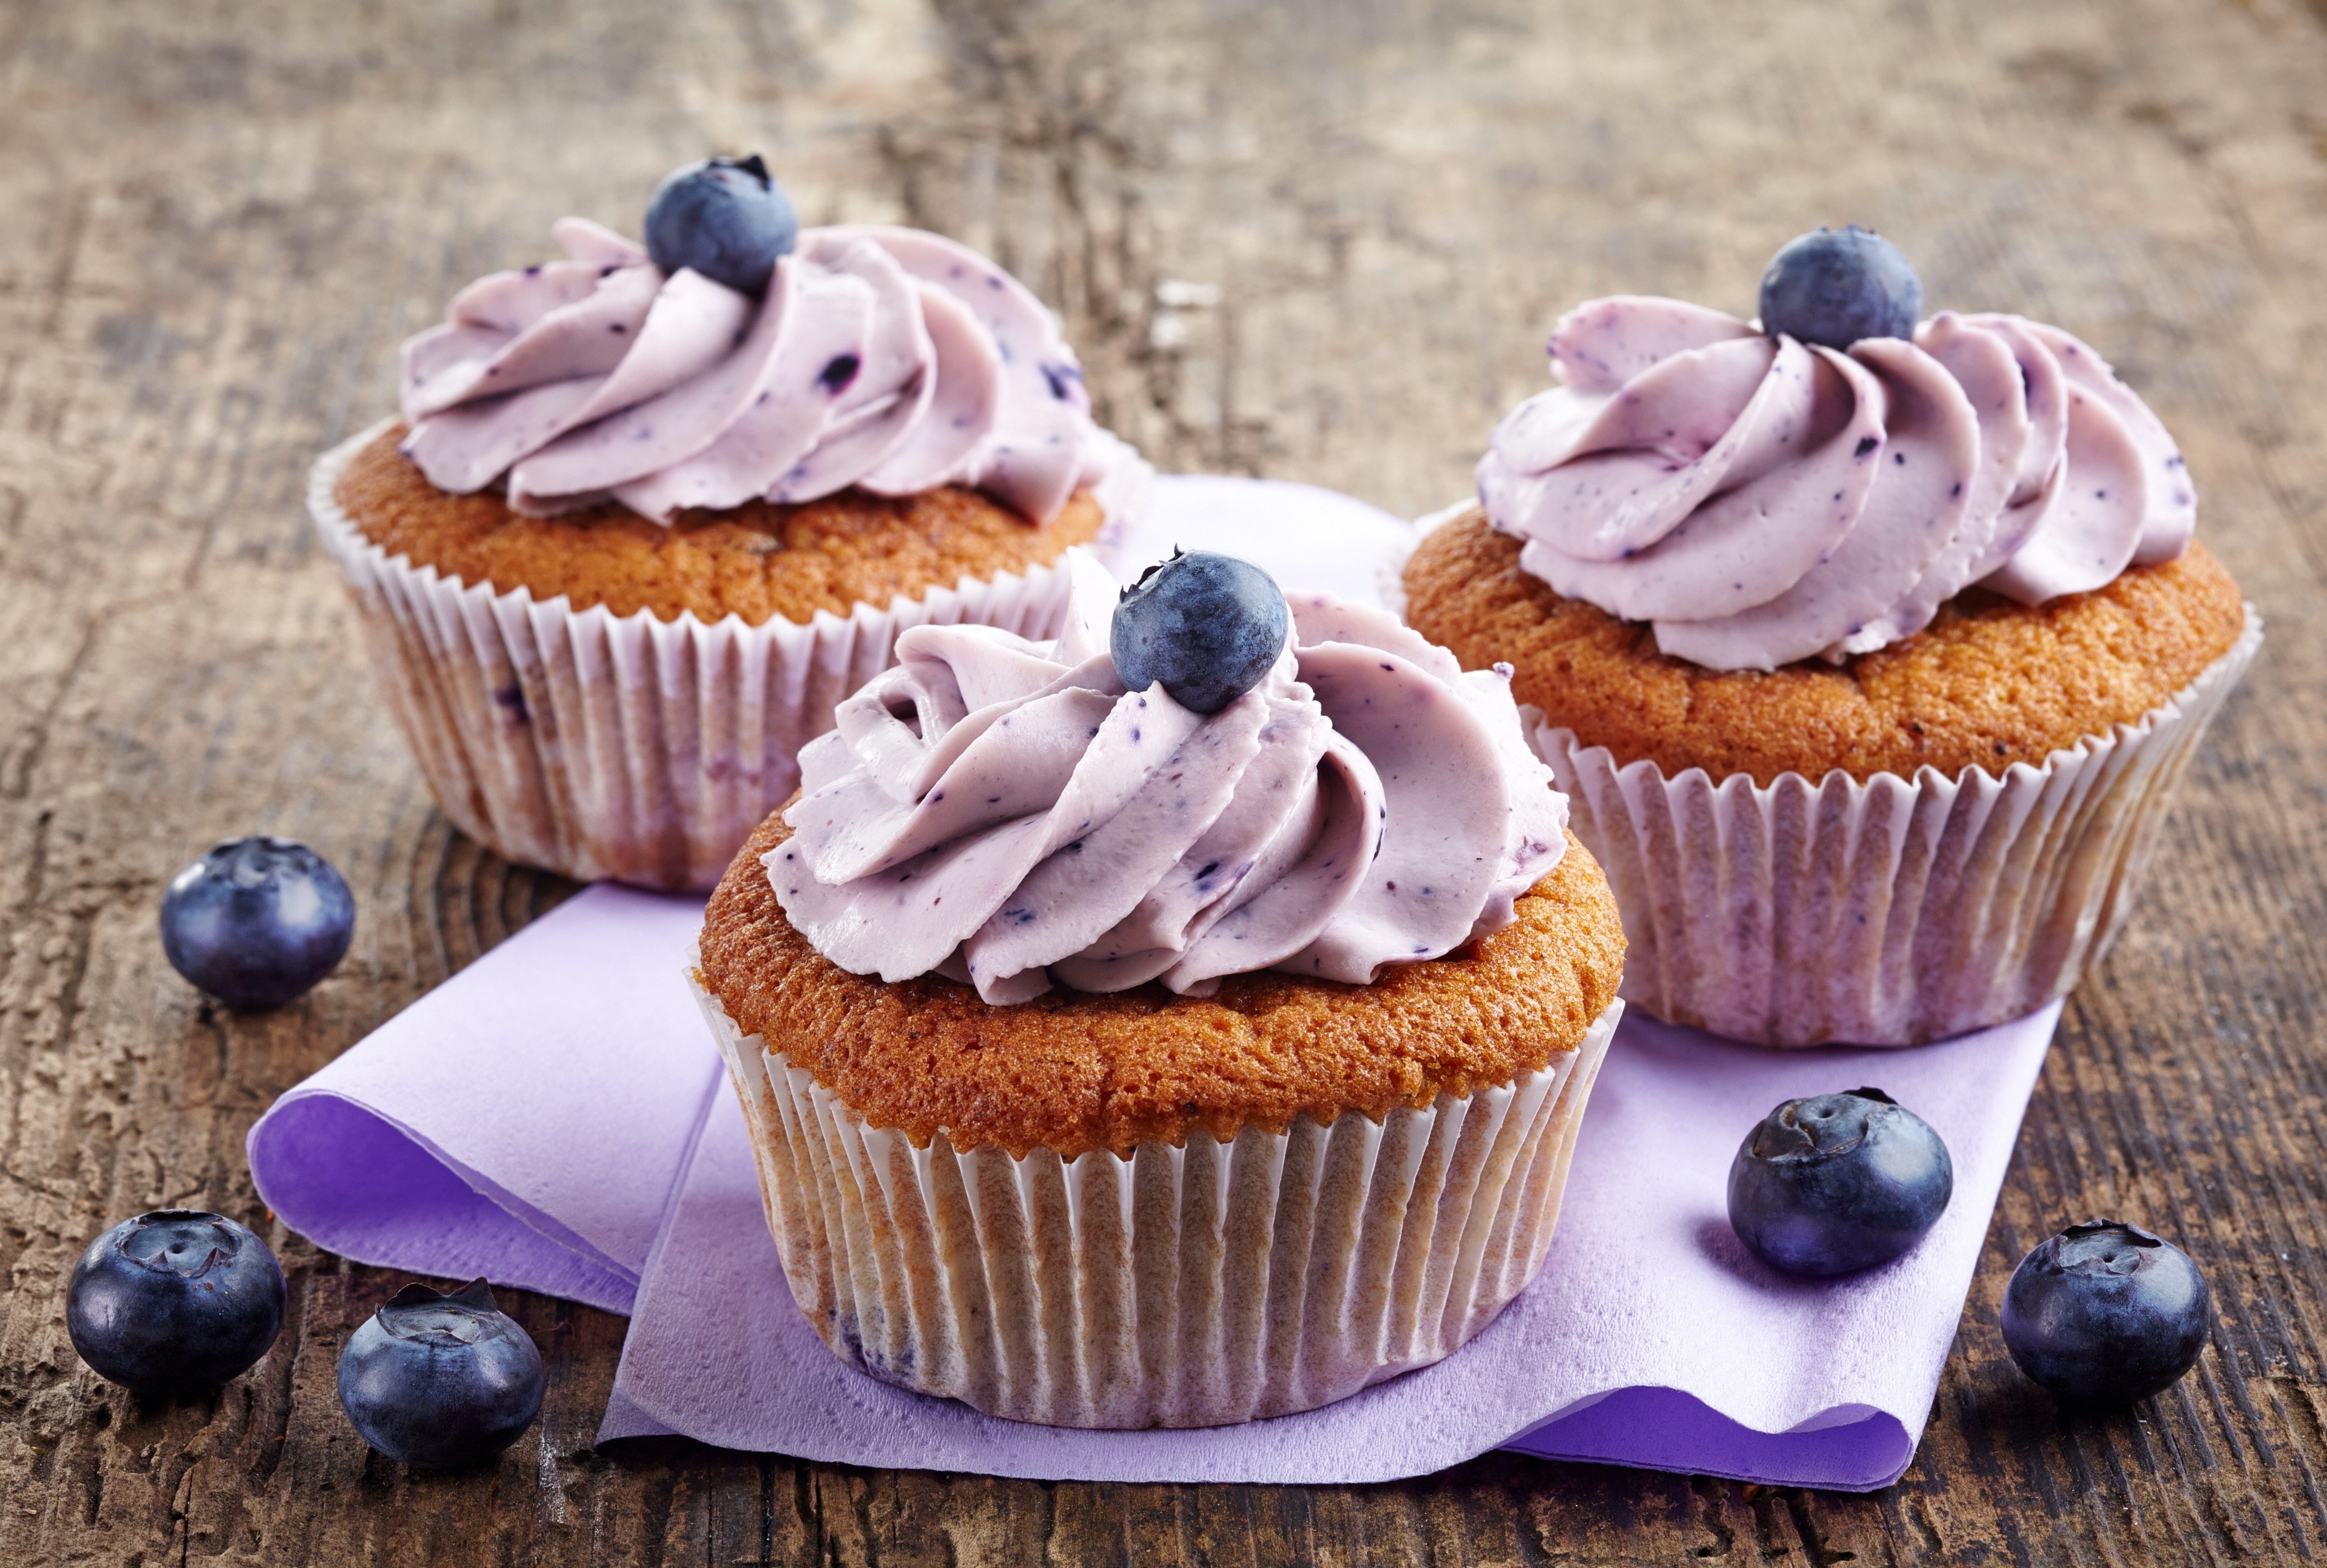 2018Food___Cakes_and_Sweet_Three_appetizing_cupcakes_with_cream_and_blueberries_123215_.jpg